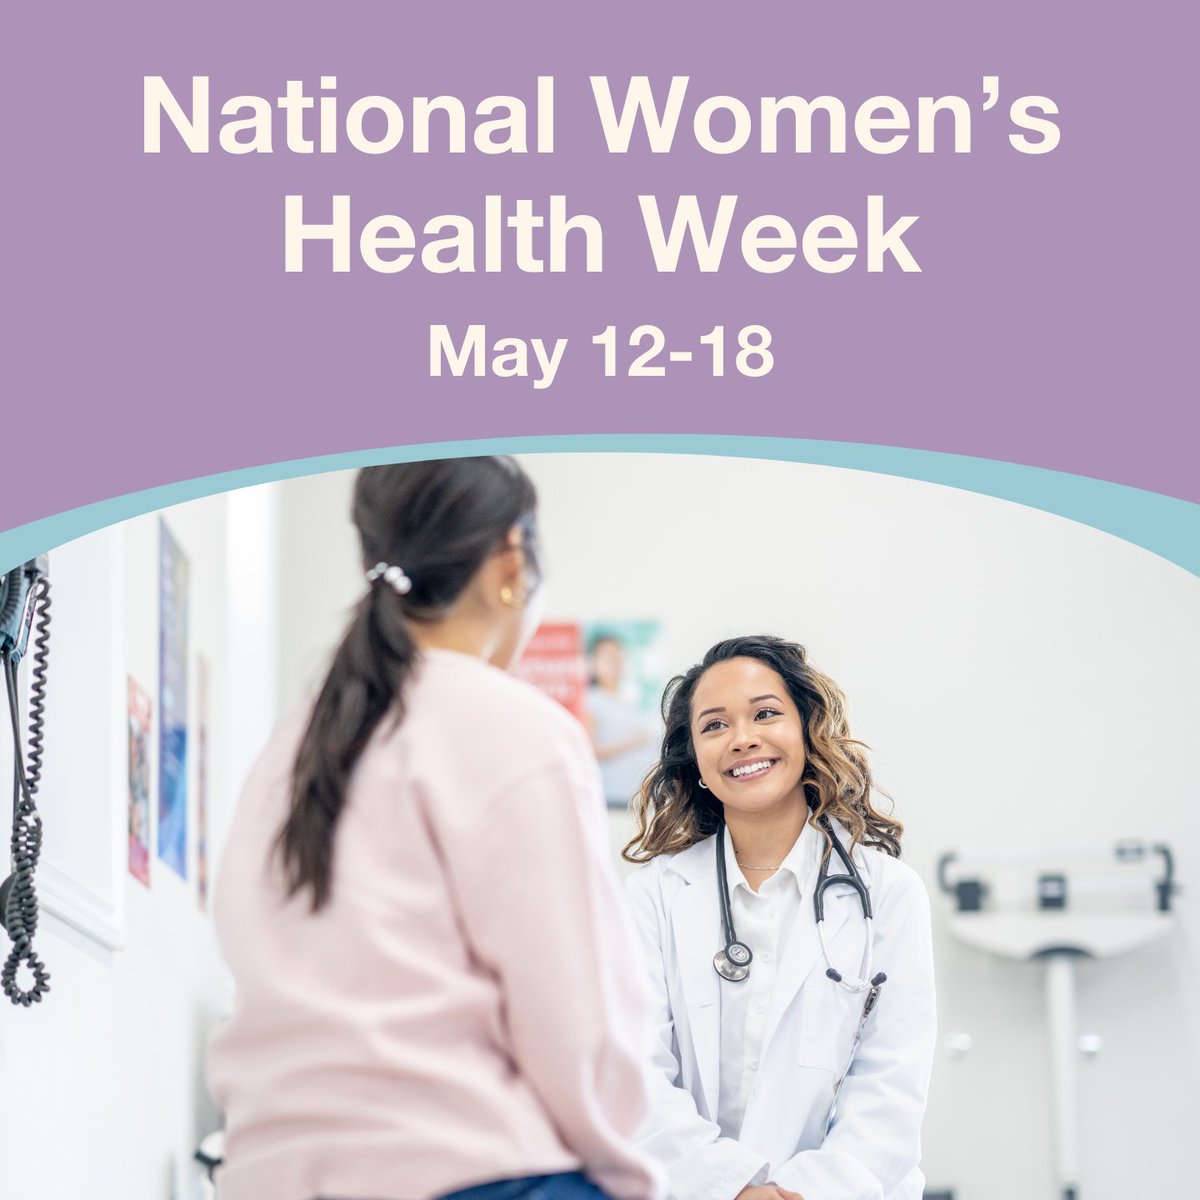 #MothersDay is the kickoff of National Women’s Health Week. We’re sharing a recent research study that investigates the relationship between Adverse Childhood Experiences (ACEs) and health behaviors in adult women. bit.ly/4bxrepN